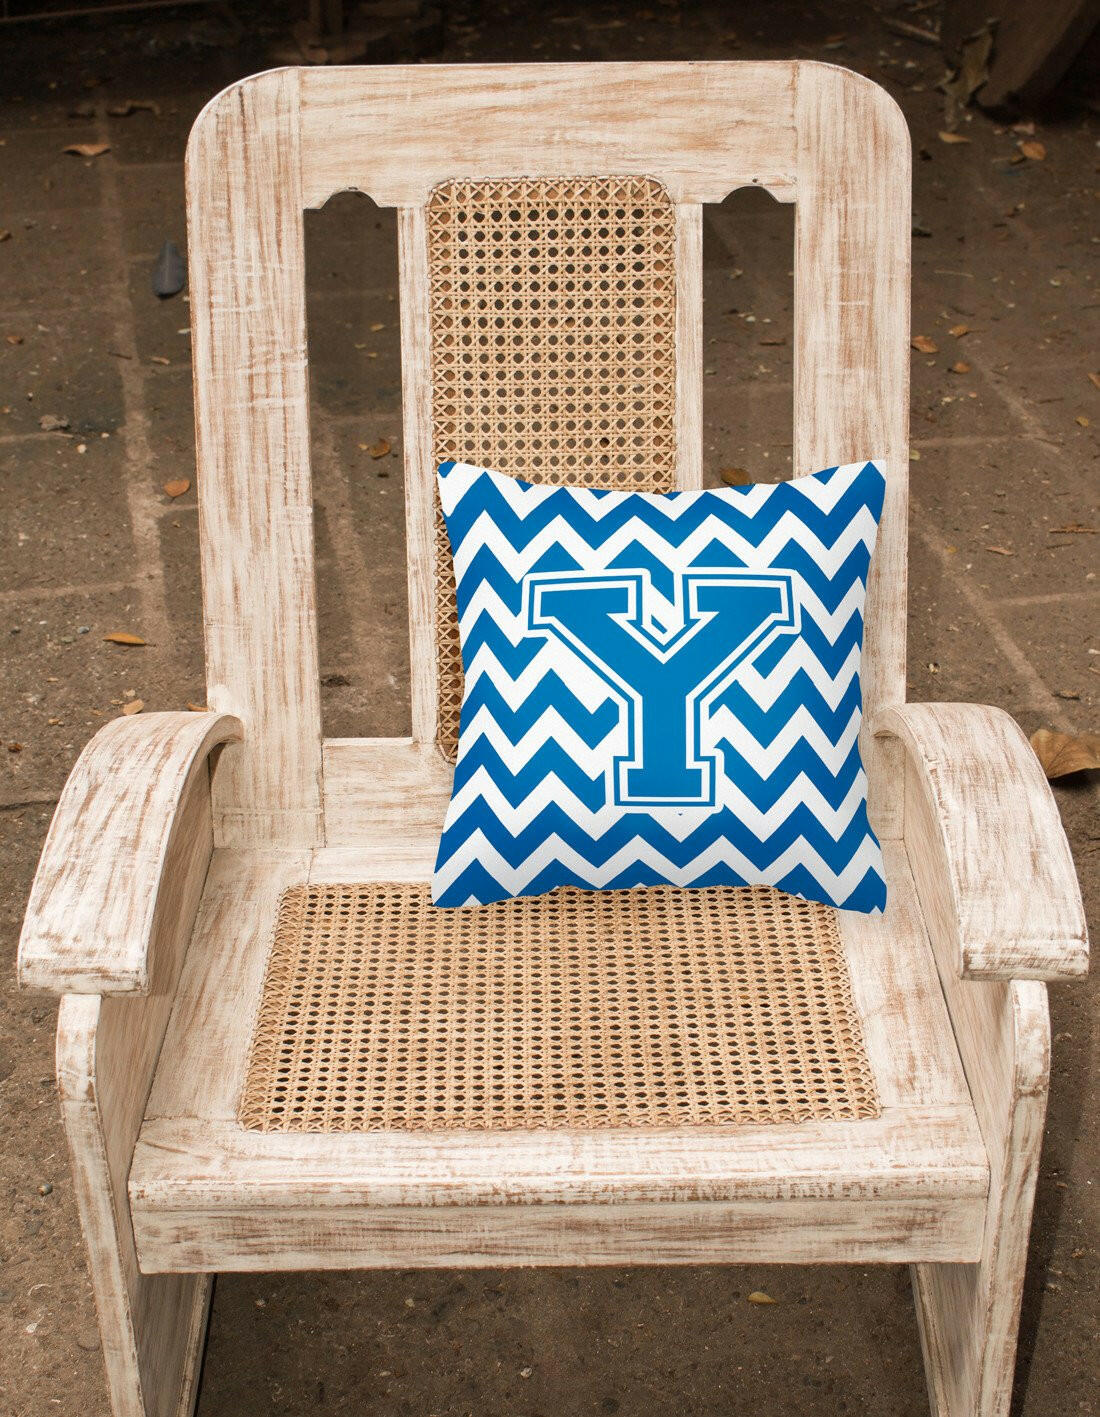 Letter Y Chevron Blue and White Fabric Decorative Pillow CJ1056-YPW1414 by Caroline's Treasures